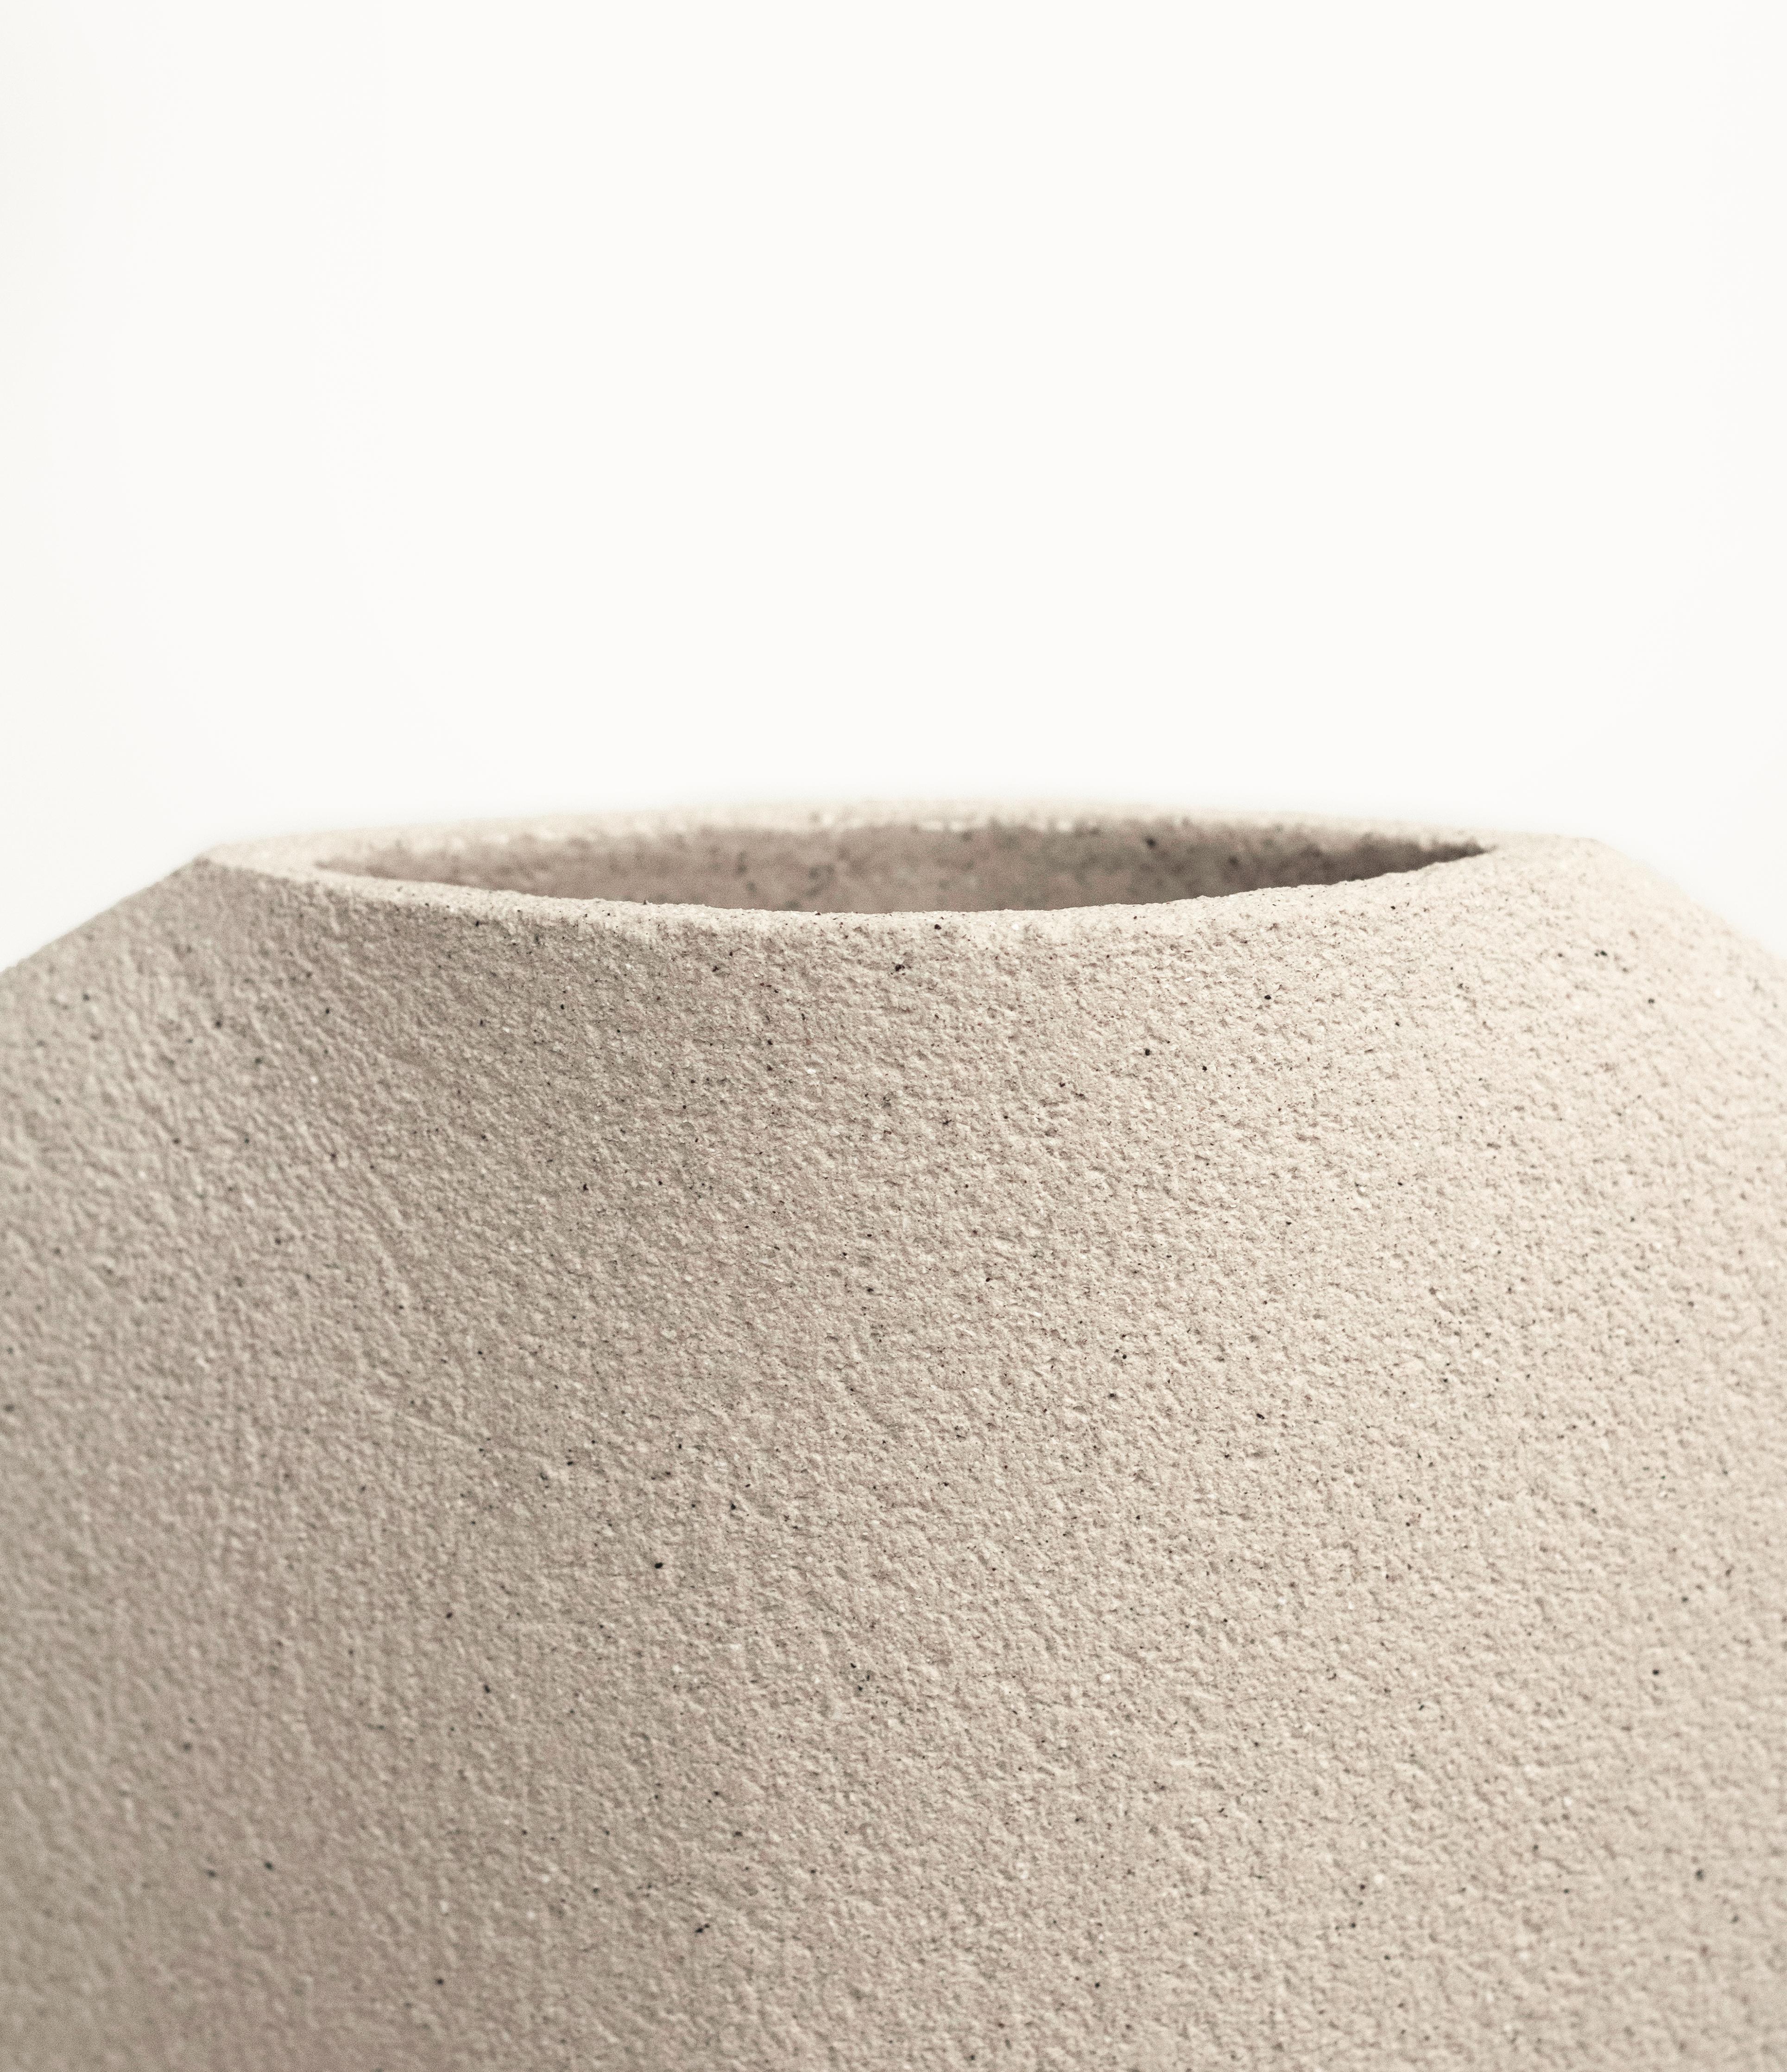 Minimalist 21st Century Clover Vase in White Ceramic, Hand-Crafted in France For Sale